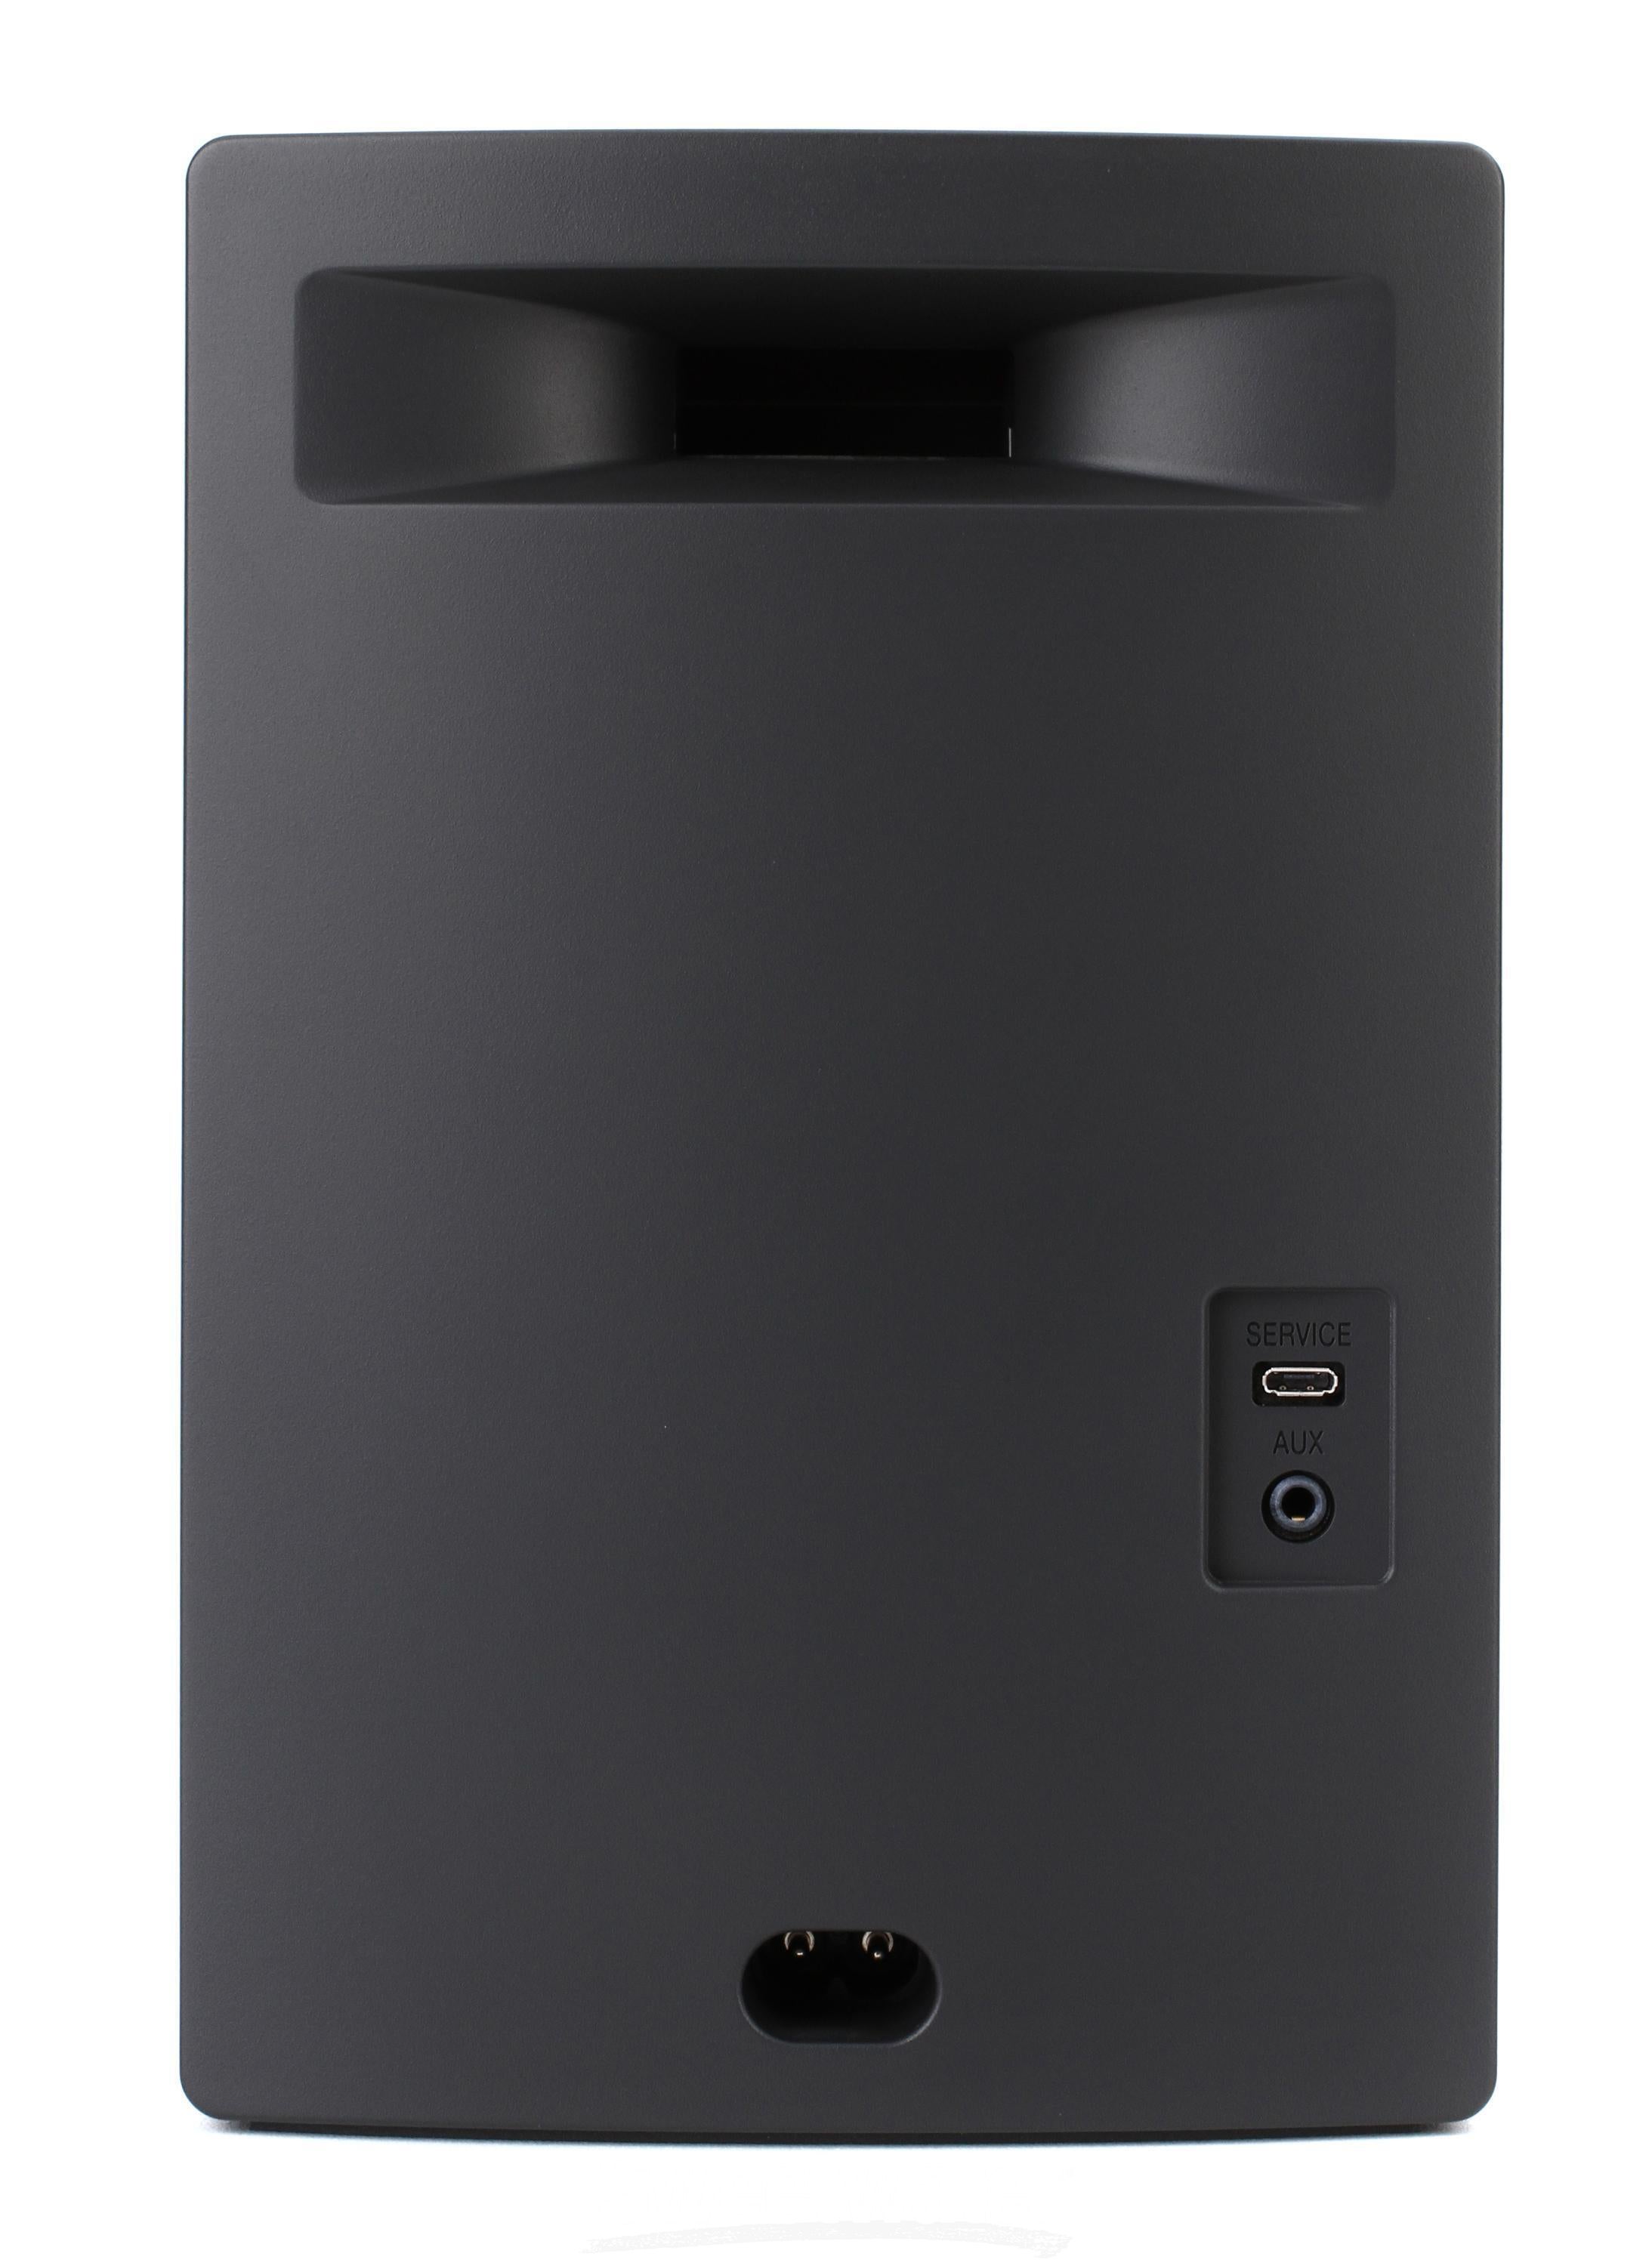 Bose SoundTouch 10 Wireless Music System - Black | Sweetwater